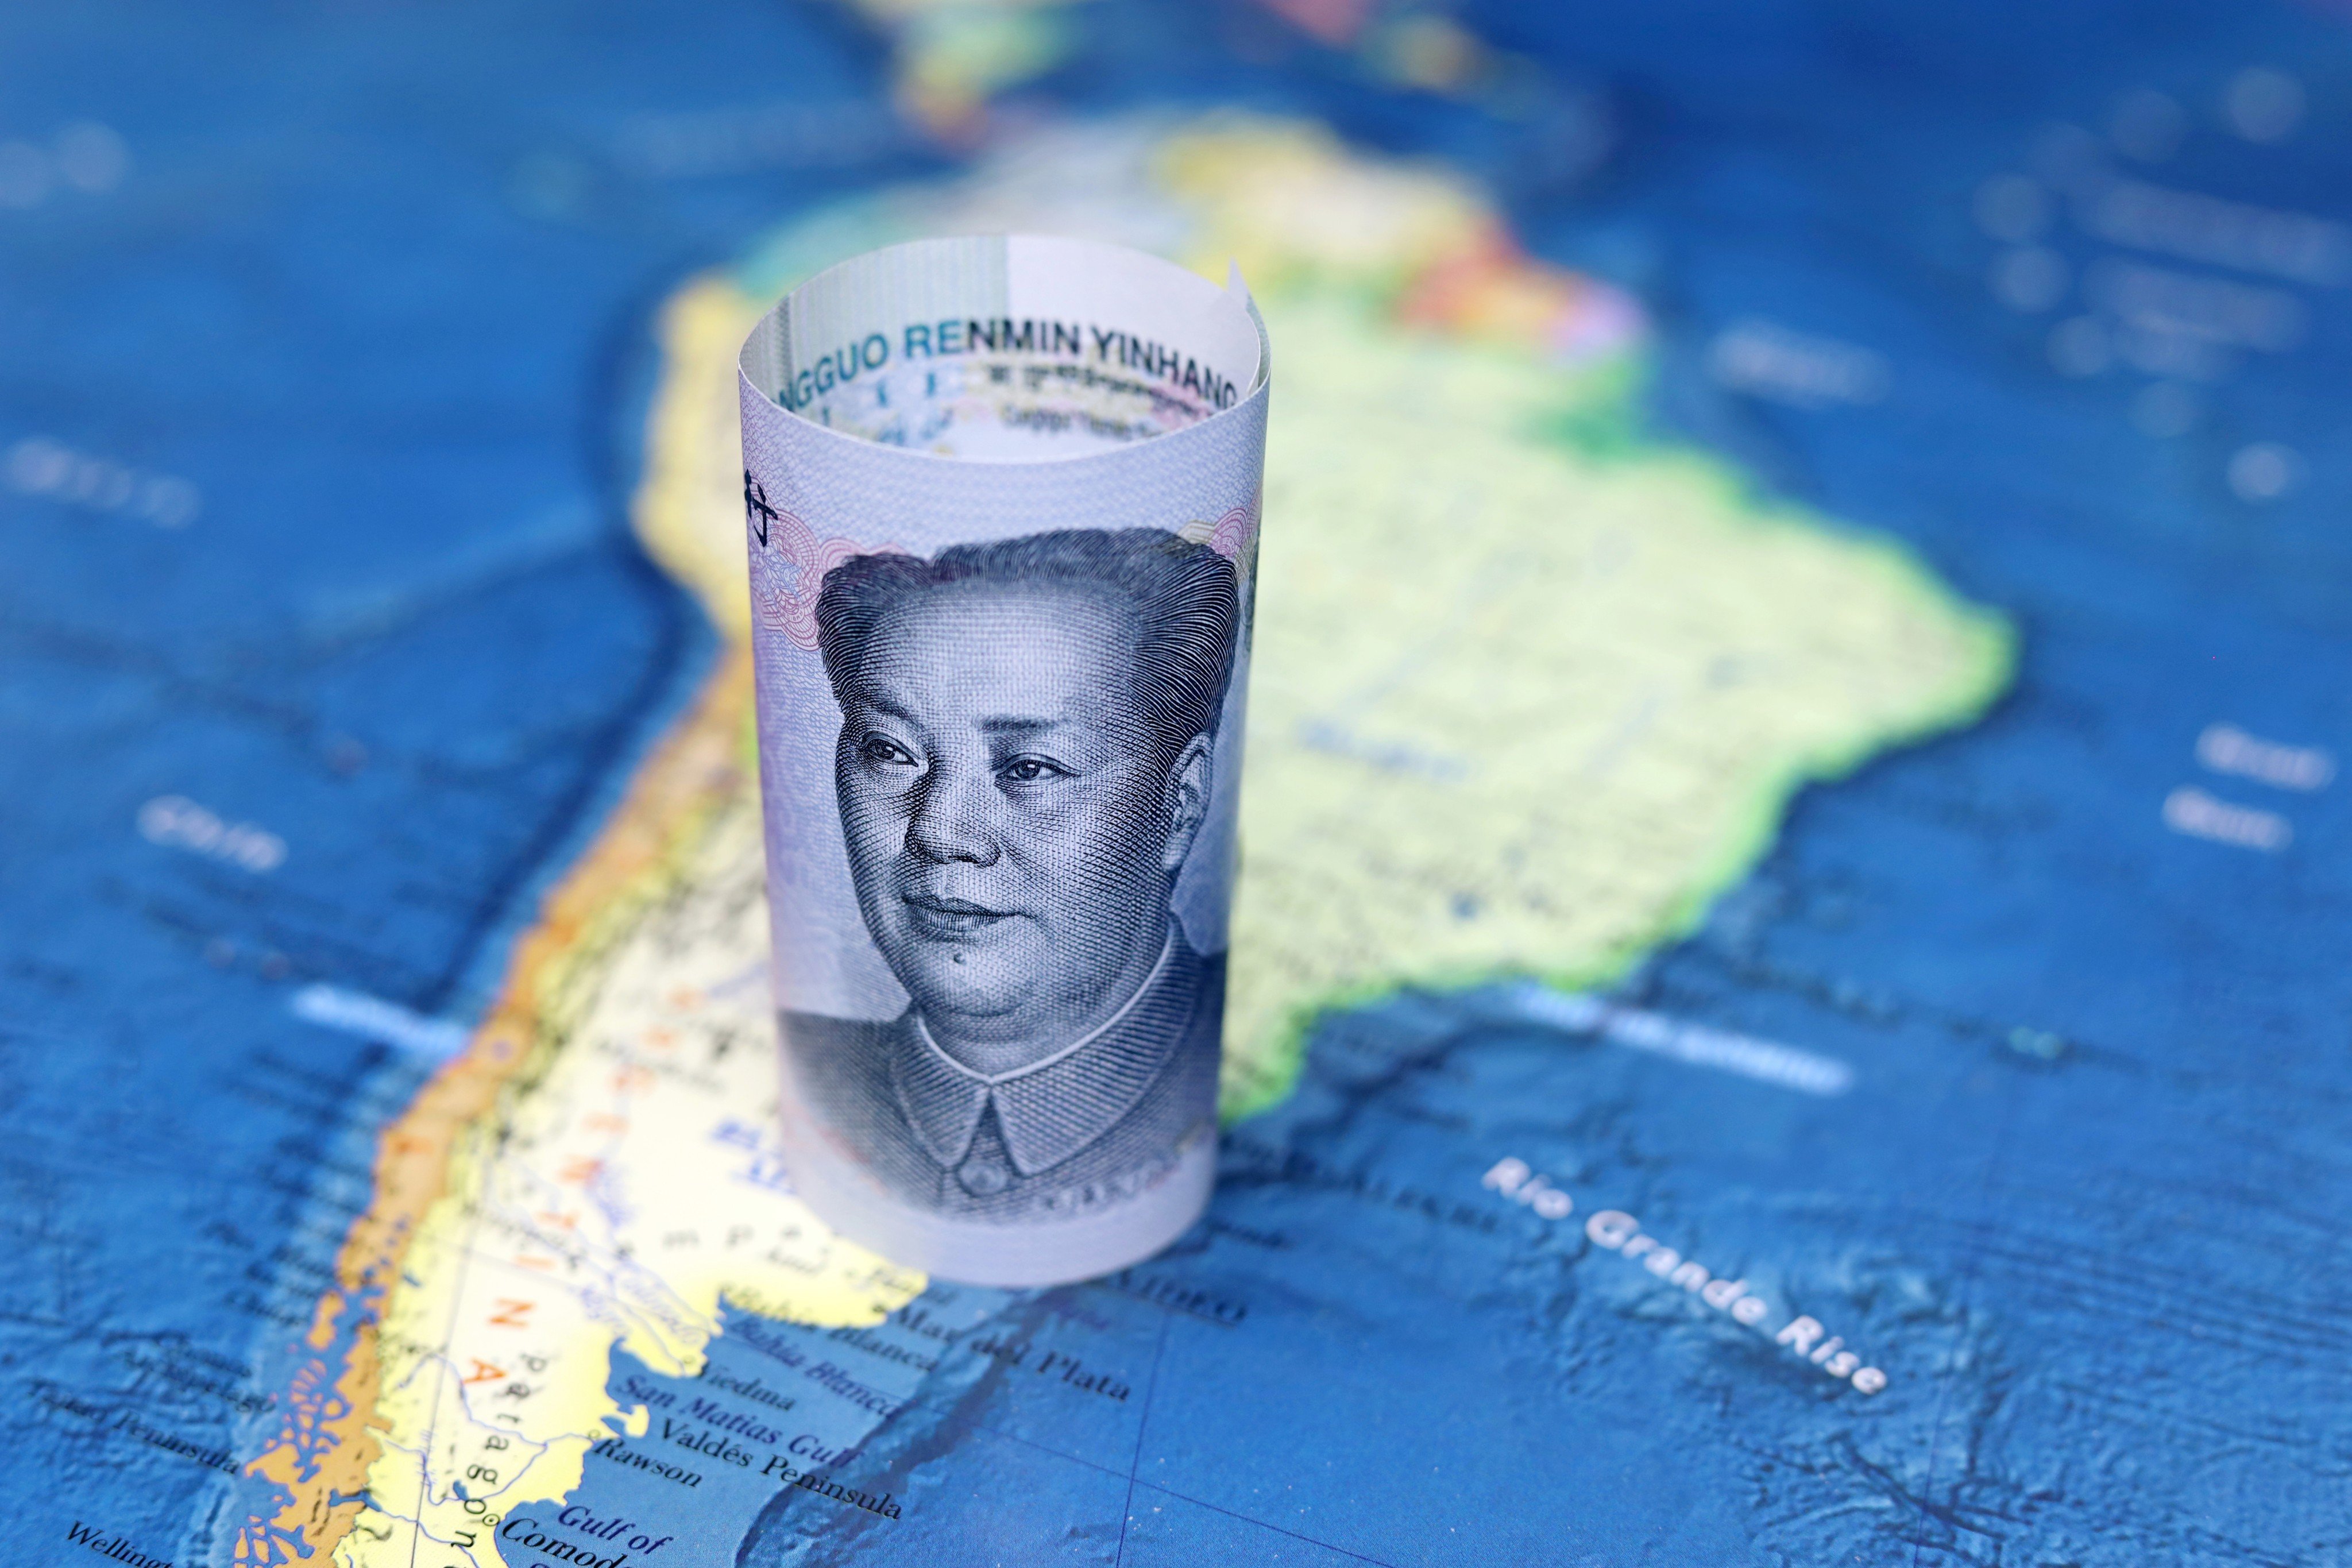 China’s ties with Latin America and the Caribbean run deep, analysts say, and there is strong demand for infrastructure development under the Belt and Road Initiative. Photo: Shutterstock Images